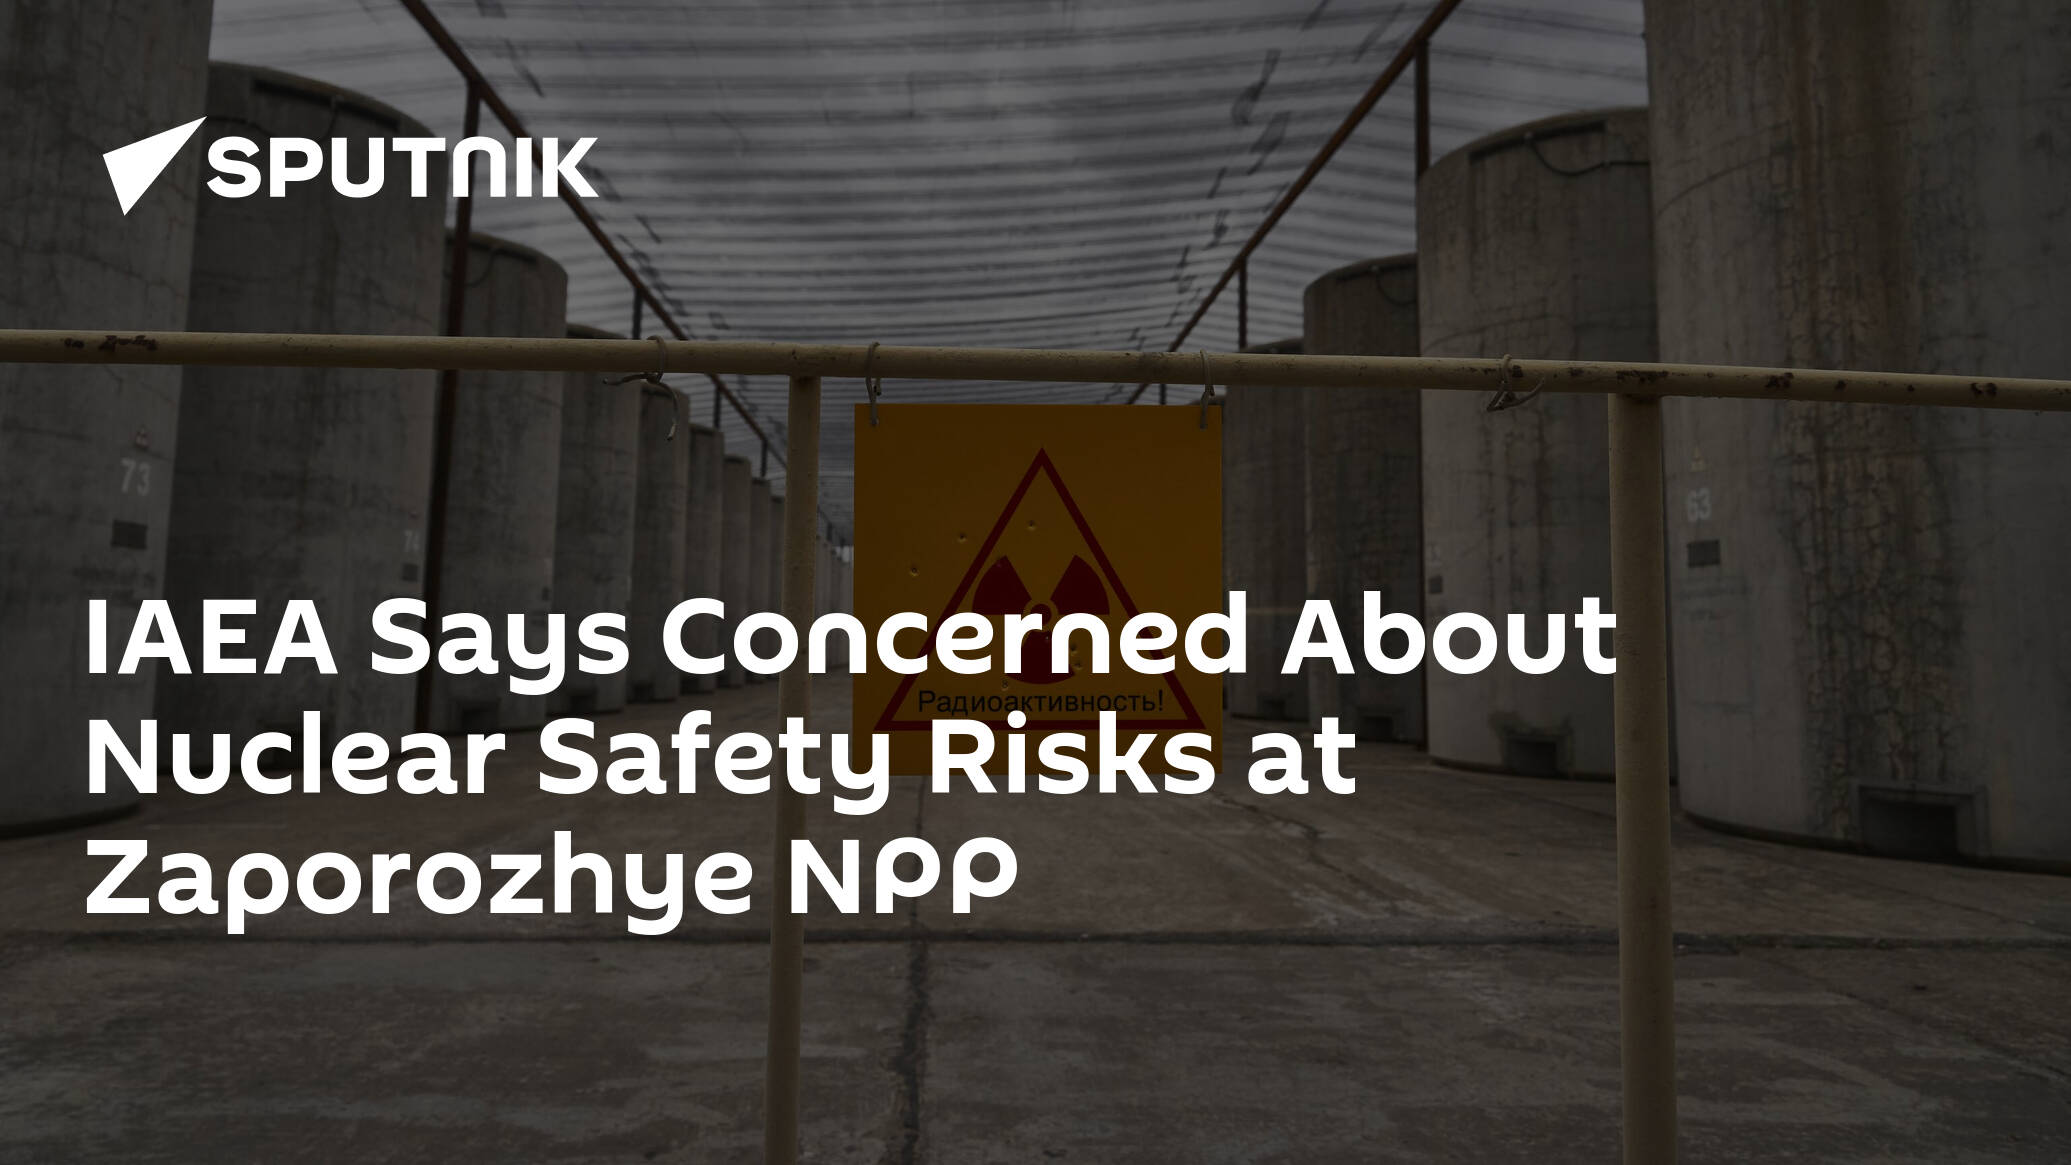 IAEA Says Concerned About Nuclear Safety Risks at Zaporozhye NPP